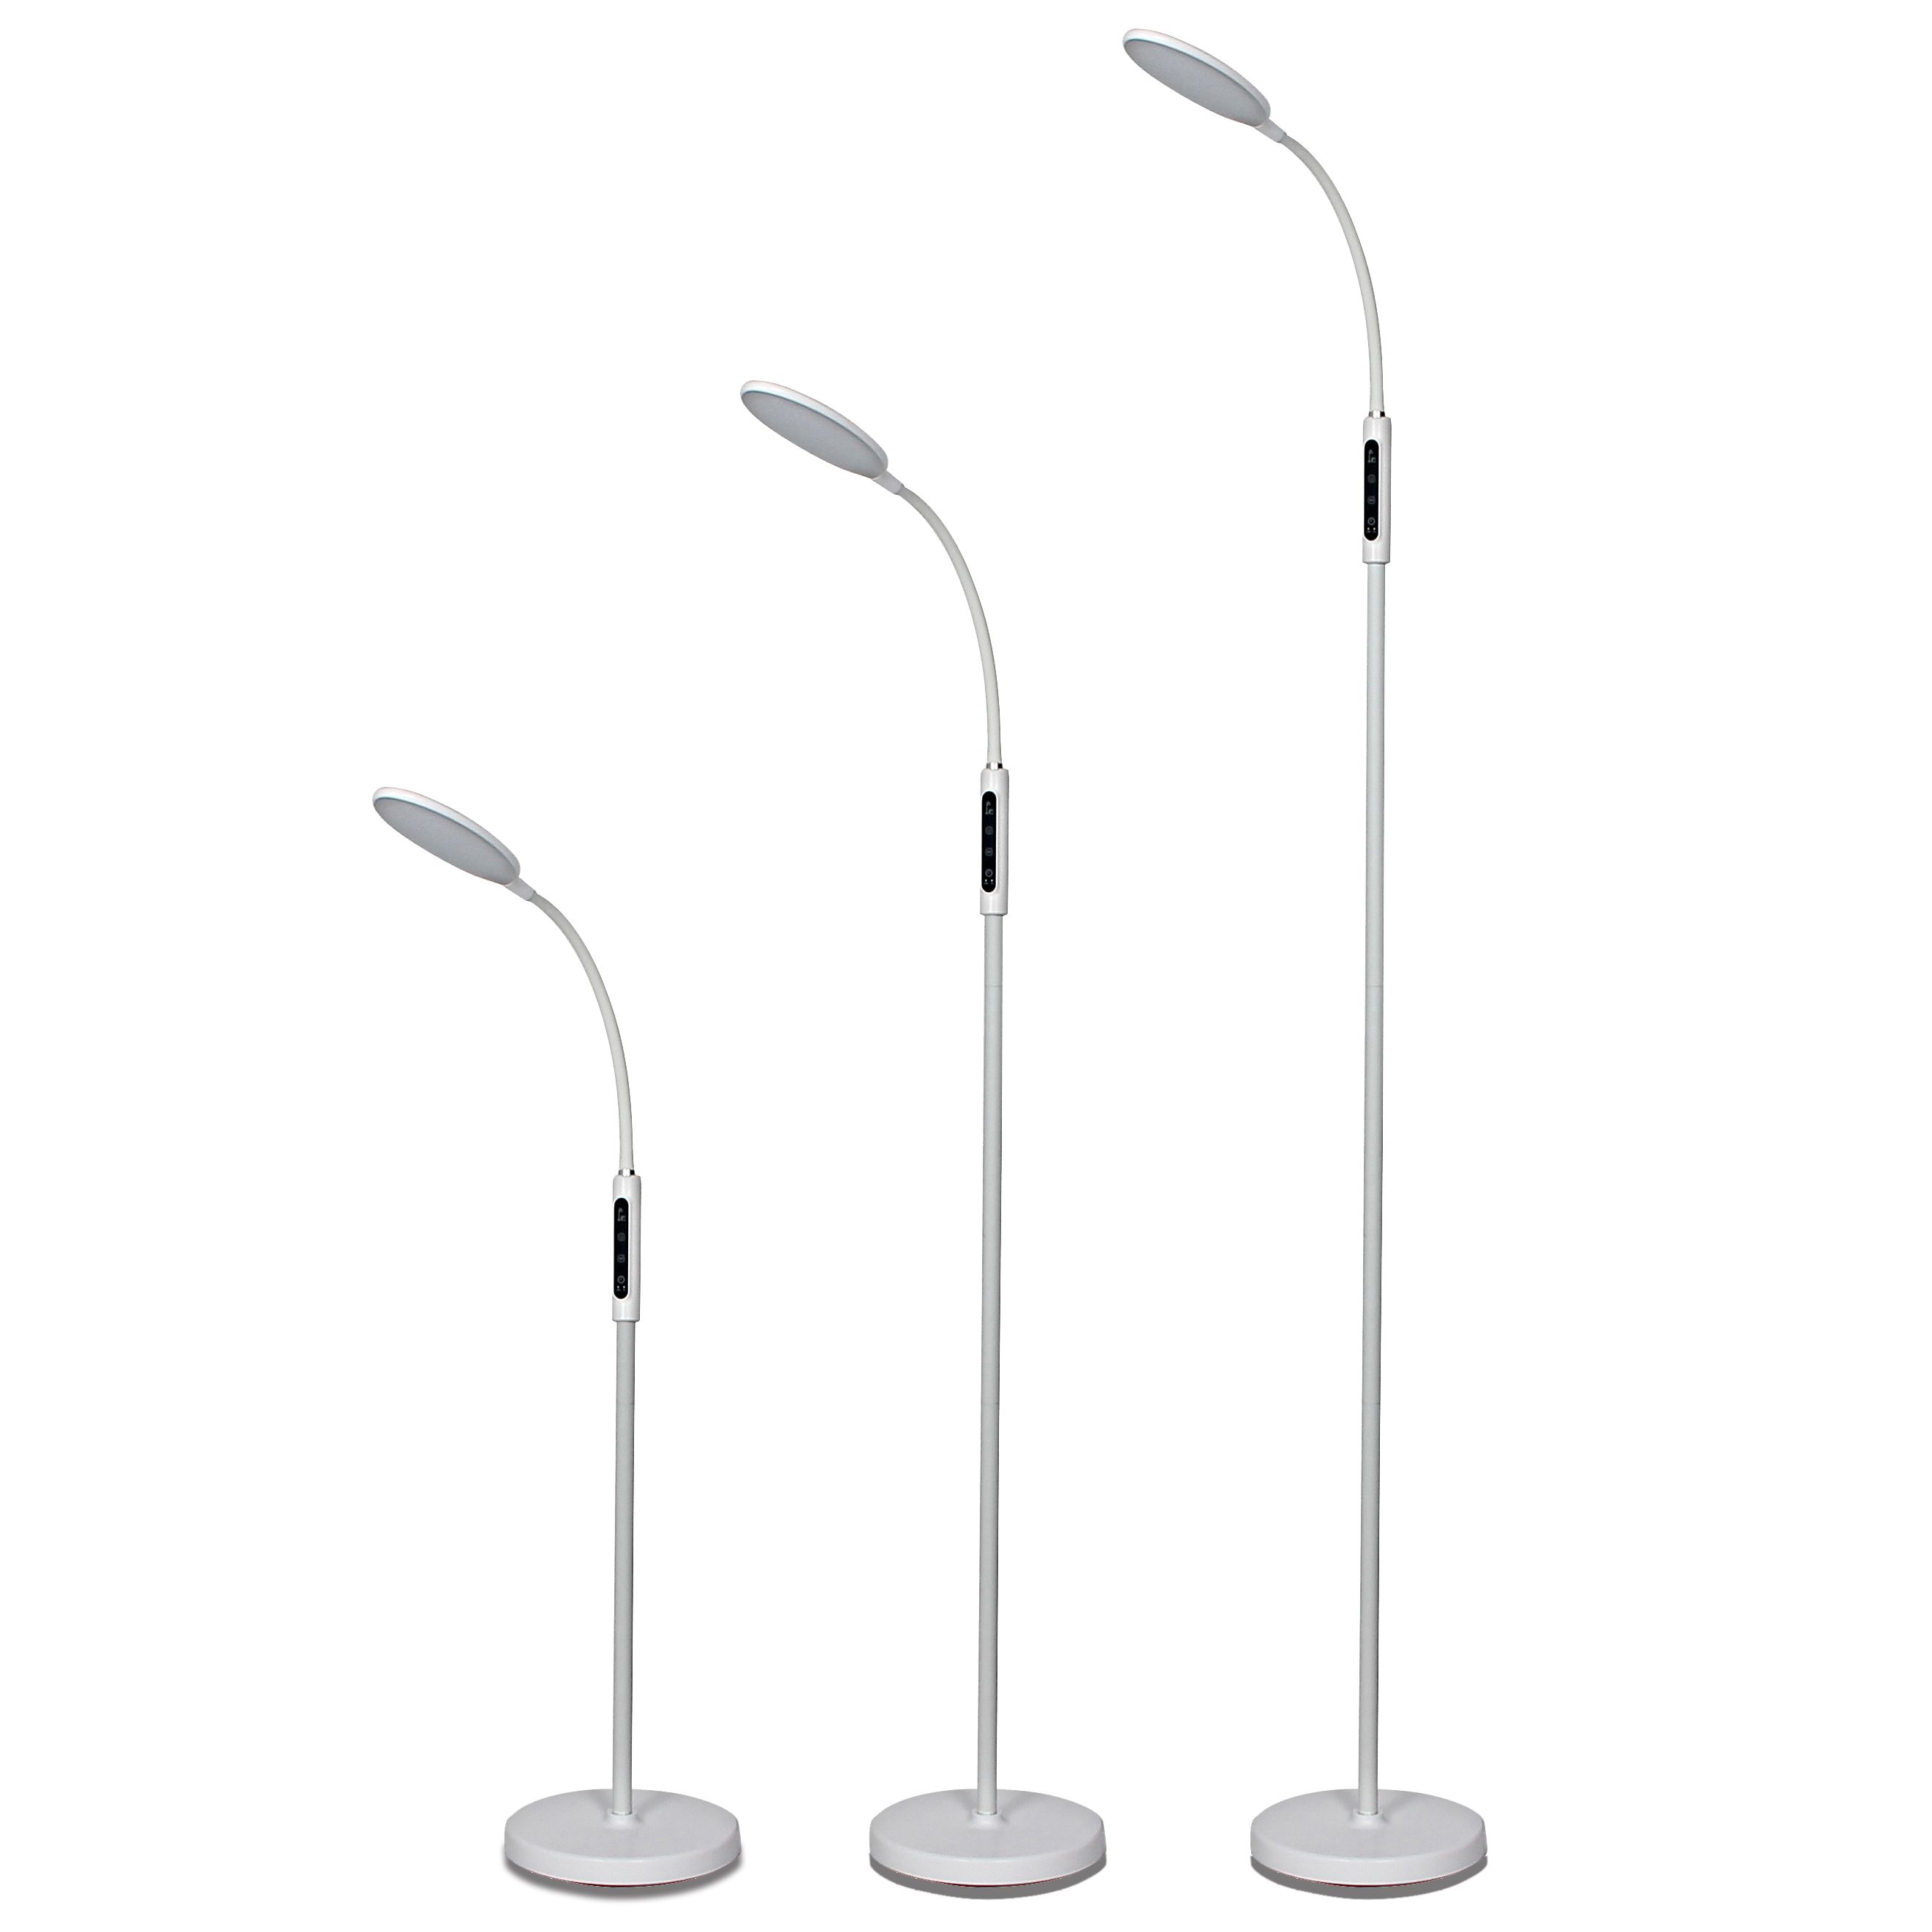 Modern Removable Adjust Floor Lamp Dimmable Remote Control Reading Learning Remote Control Lamps Work Lighting Led Floor Lamp